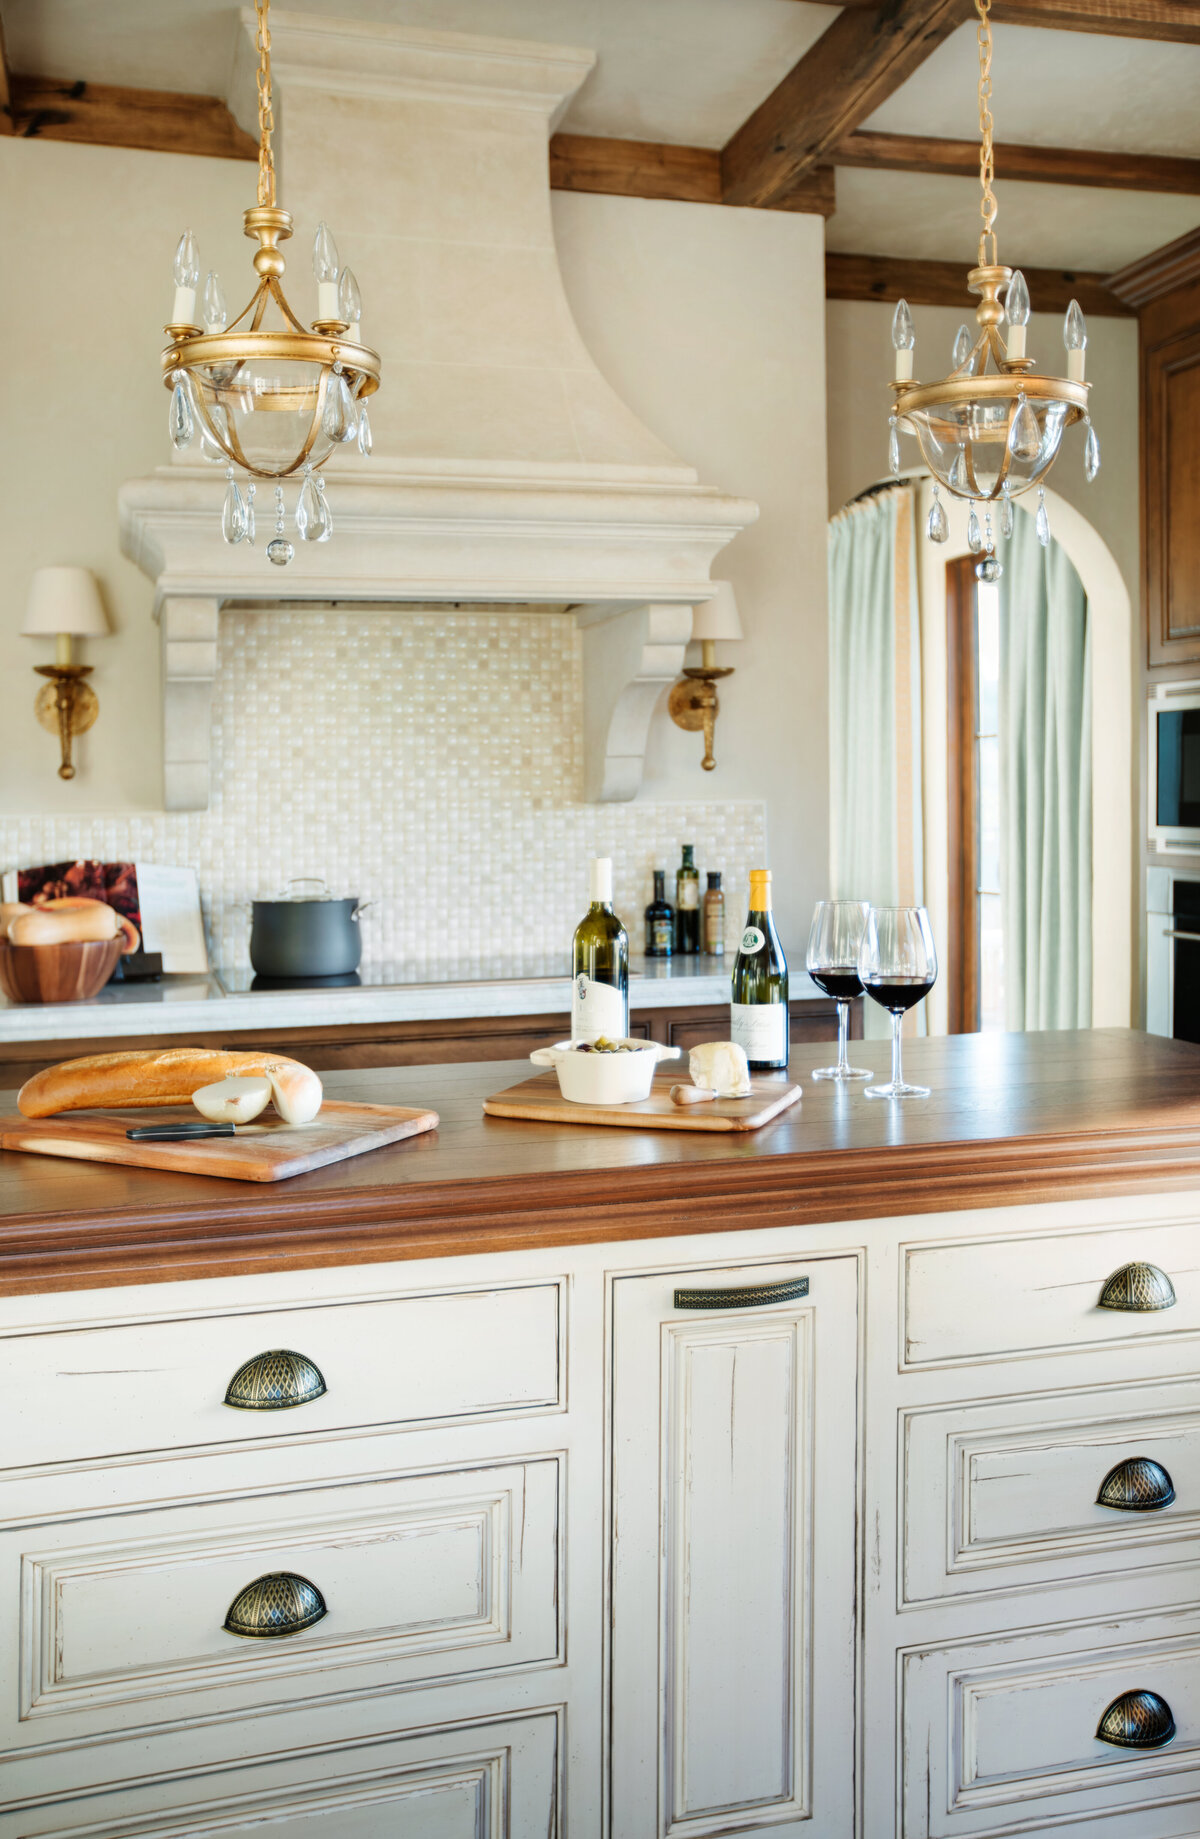 Panageries Residential Interior Design | Italian Country Villa Kitchen Island Details with Wine and Bread